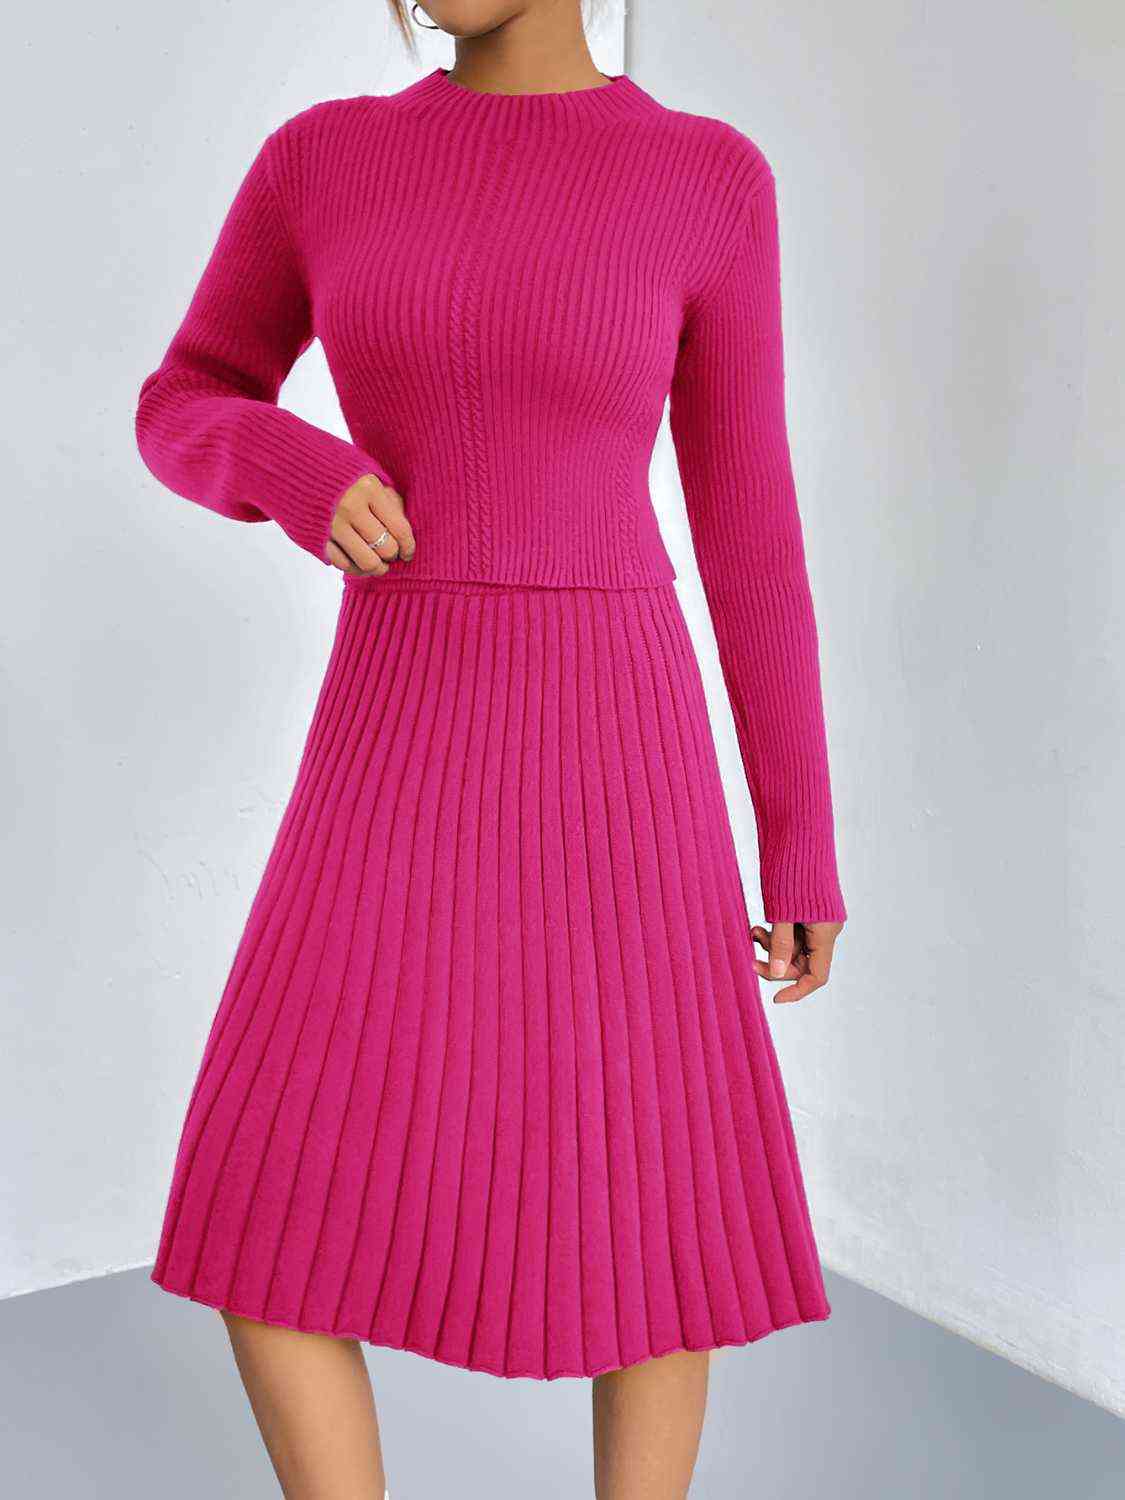 Comfortable and Versatile: Rib-Knit Sweater and Skirt Set